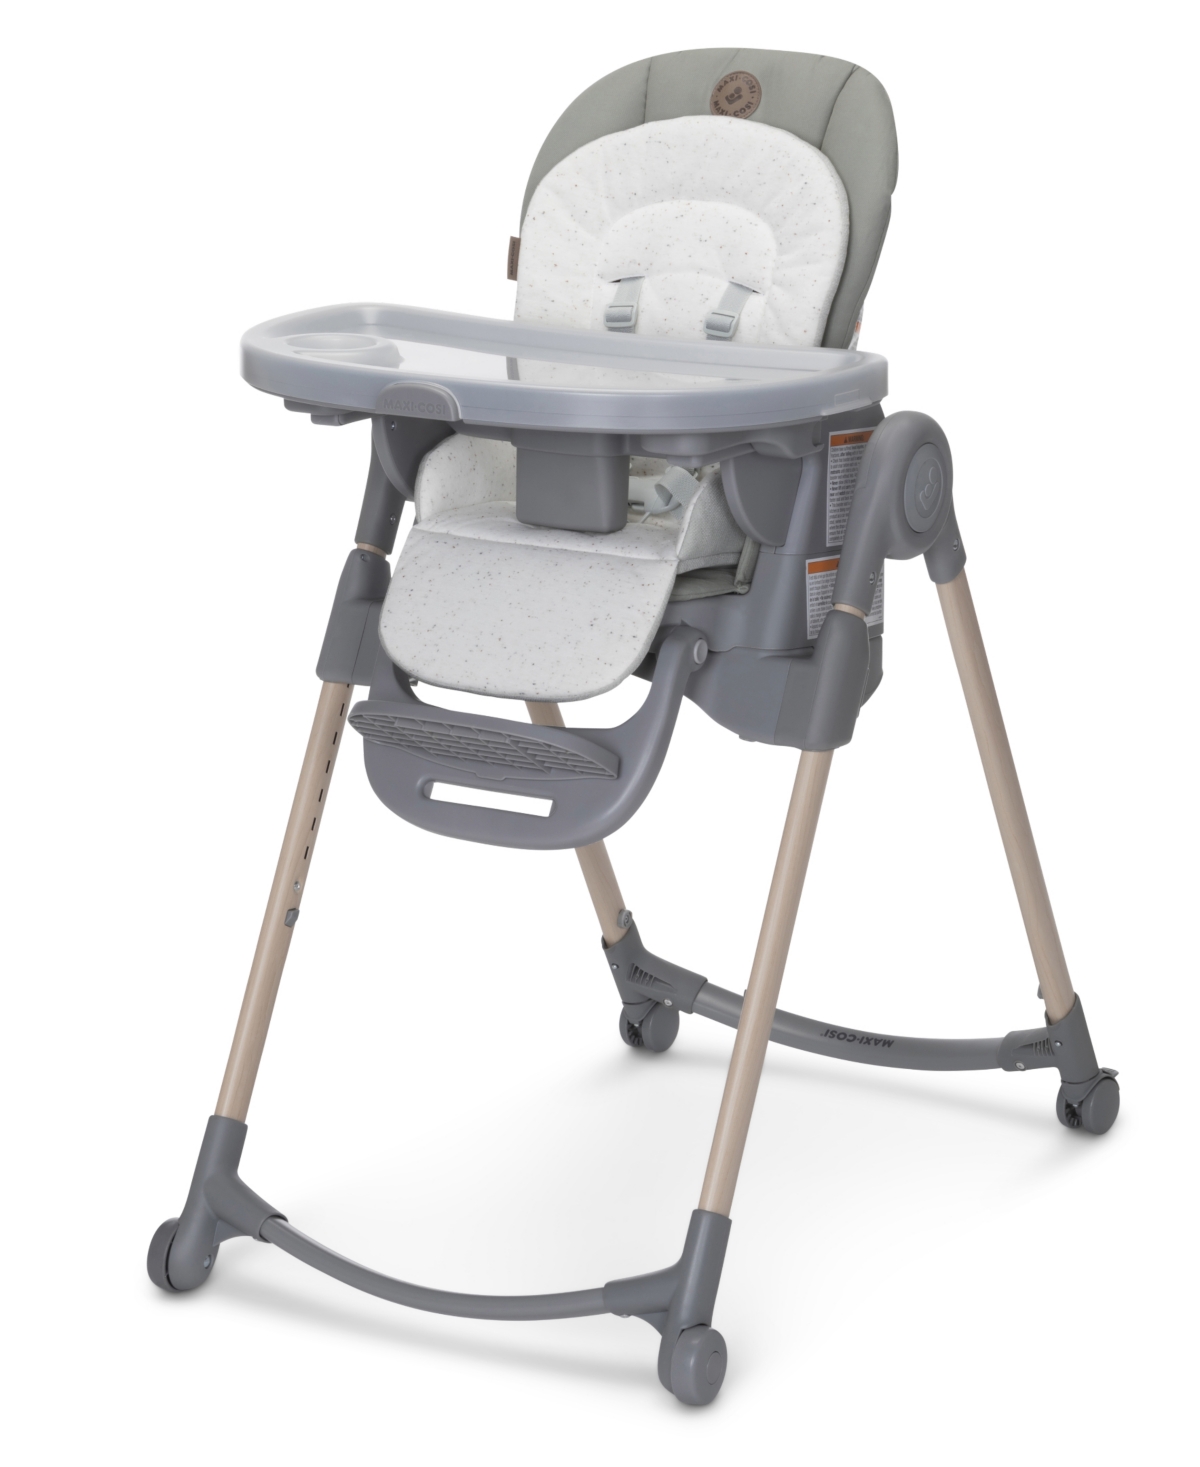 Maxi-cosi Baby Boys Or Baby Girls Minla 6-in-1 Adjustable High Chair In Classic Green